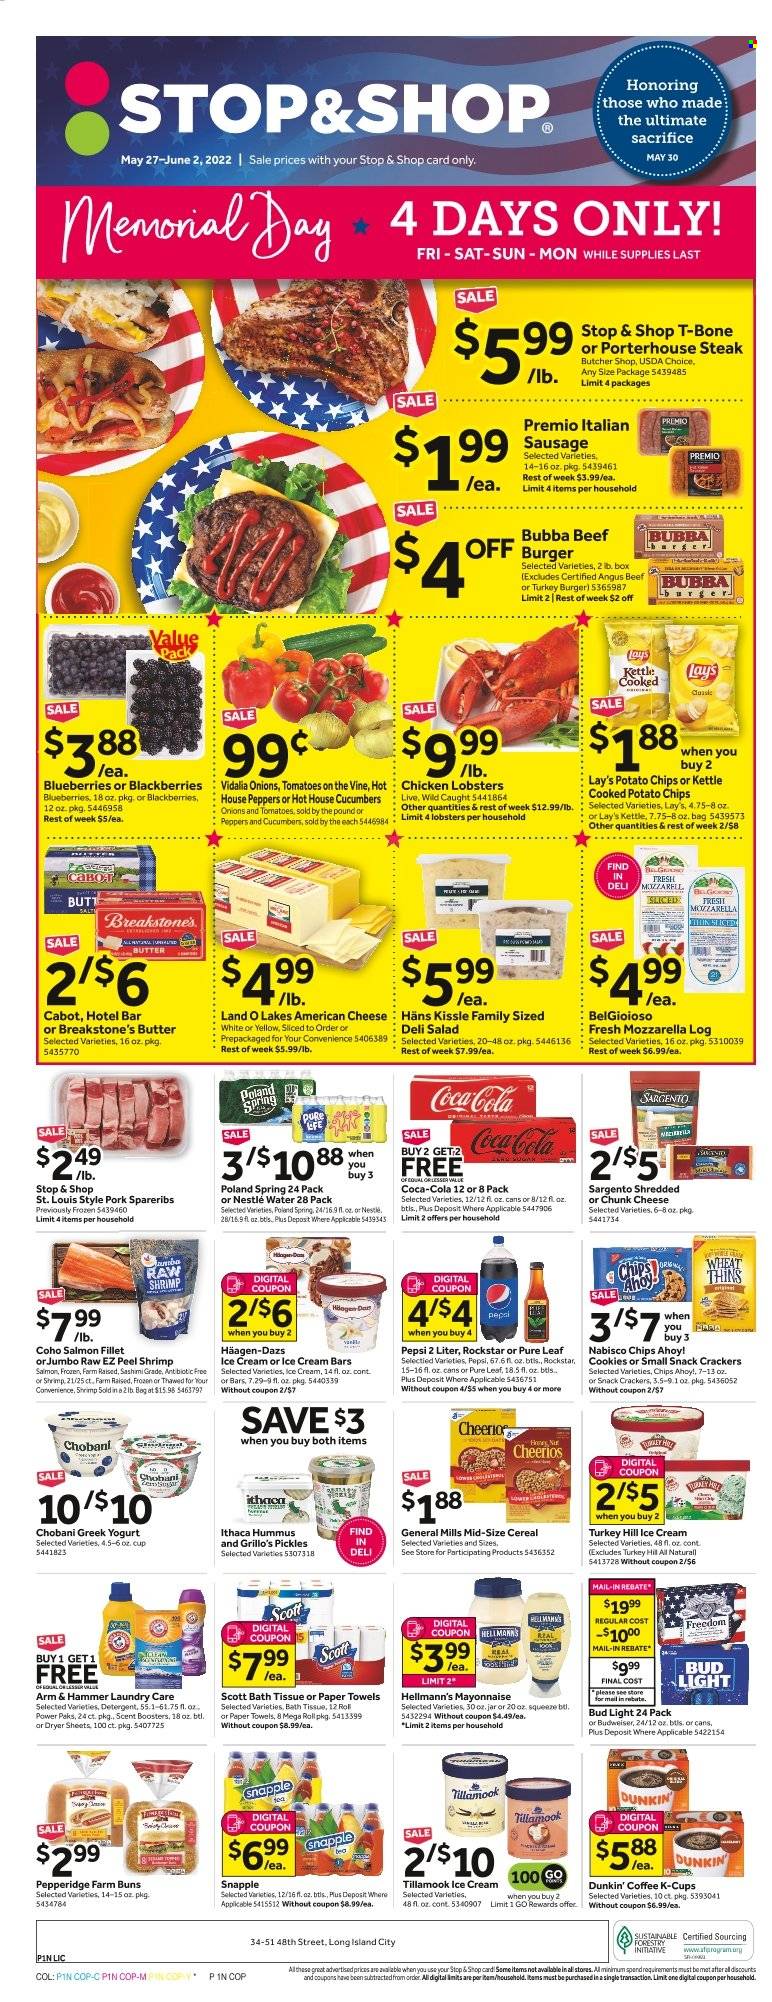 thumbnail - Stop & Shop Flyer - 05/27/2022 - 06/02/2022 - Sales products - buns, blackberries, blueberries, beef meat, t-bone steak, steak, turkey burger, pork spare ribs, lobster, salmon, salmon fillet, shrimps, hummus, american cheese, mozzarella, cheese, chunk cheese, Sargento, greek yoghurt, yoghurt, Chobani, butter, mayonnaise, Hellmann’s, ice cream, ice cream bars, Häagen-Dazs, cookies, Nestlé, crackers, Chips Ahoy!, potato chips, Lay’s, ARM & HAMMER, pickles, cereals, Cheerios, Coca-Cola, Pepsi, Snapple, Rockstar, Pure Leaf, coffee, coffee capsules, K-Cups, beer, Bud Light, bath tissue, Scott, kitchen towels, paper towels, dryer sheets, scent booster, pin, Budweiser. Page 1.